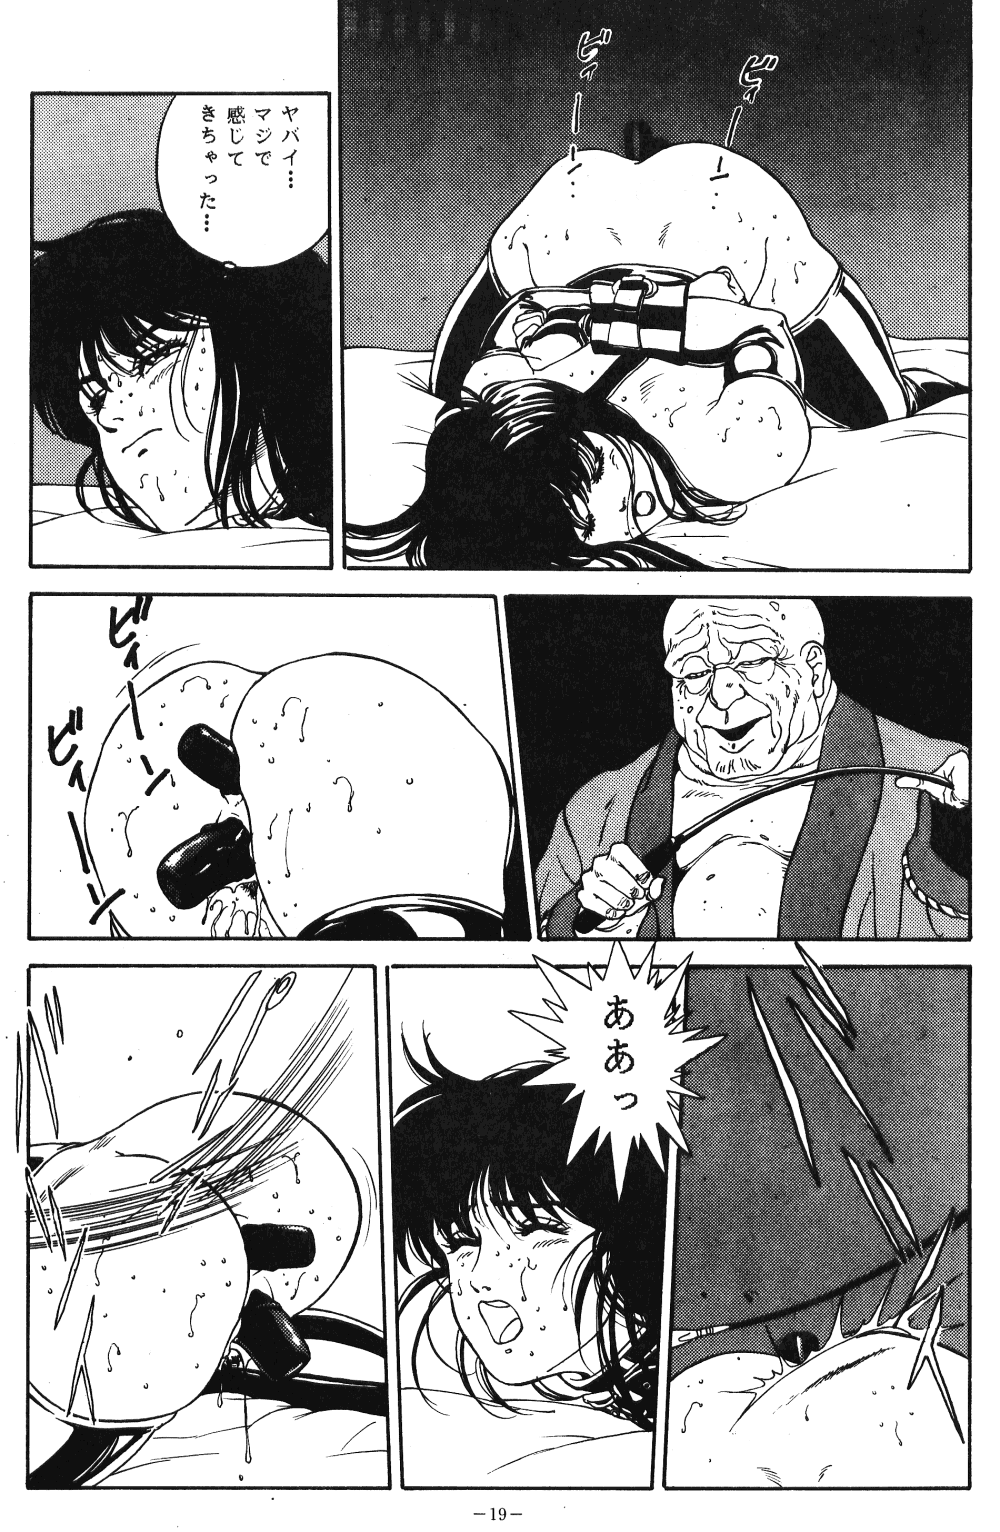 [ALPS (Various)] LOOK OUT 21 (Various) page 18 full